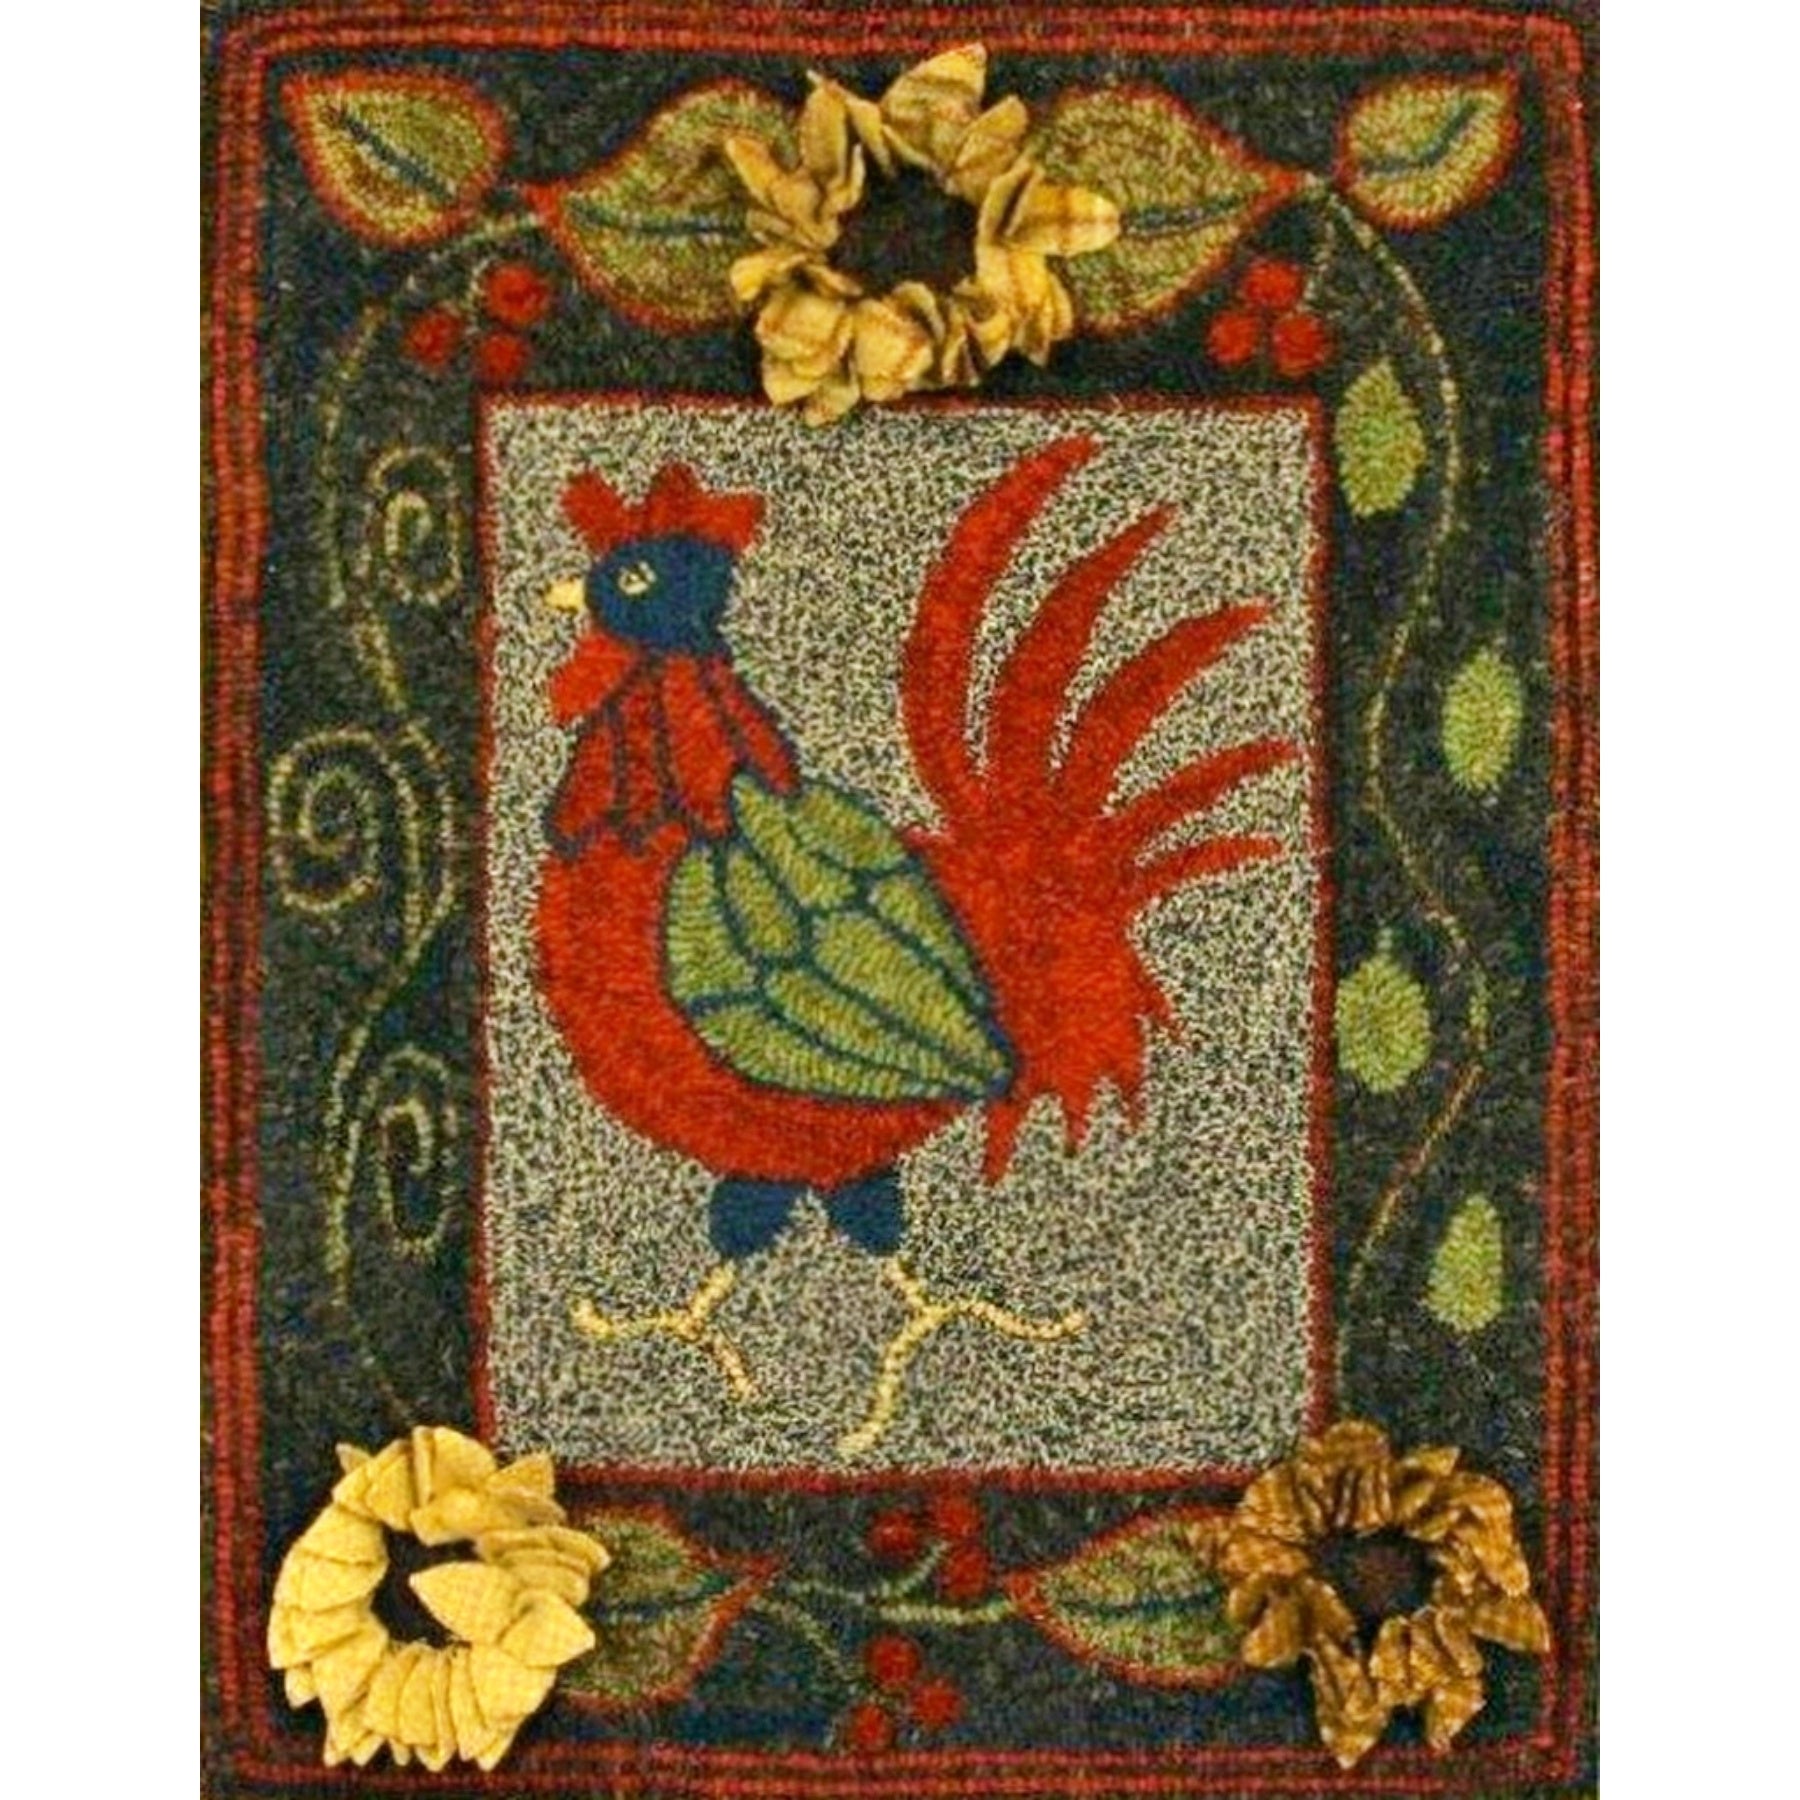 Rooster With Sunflowers, rug hooked by Karen Guffey